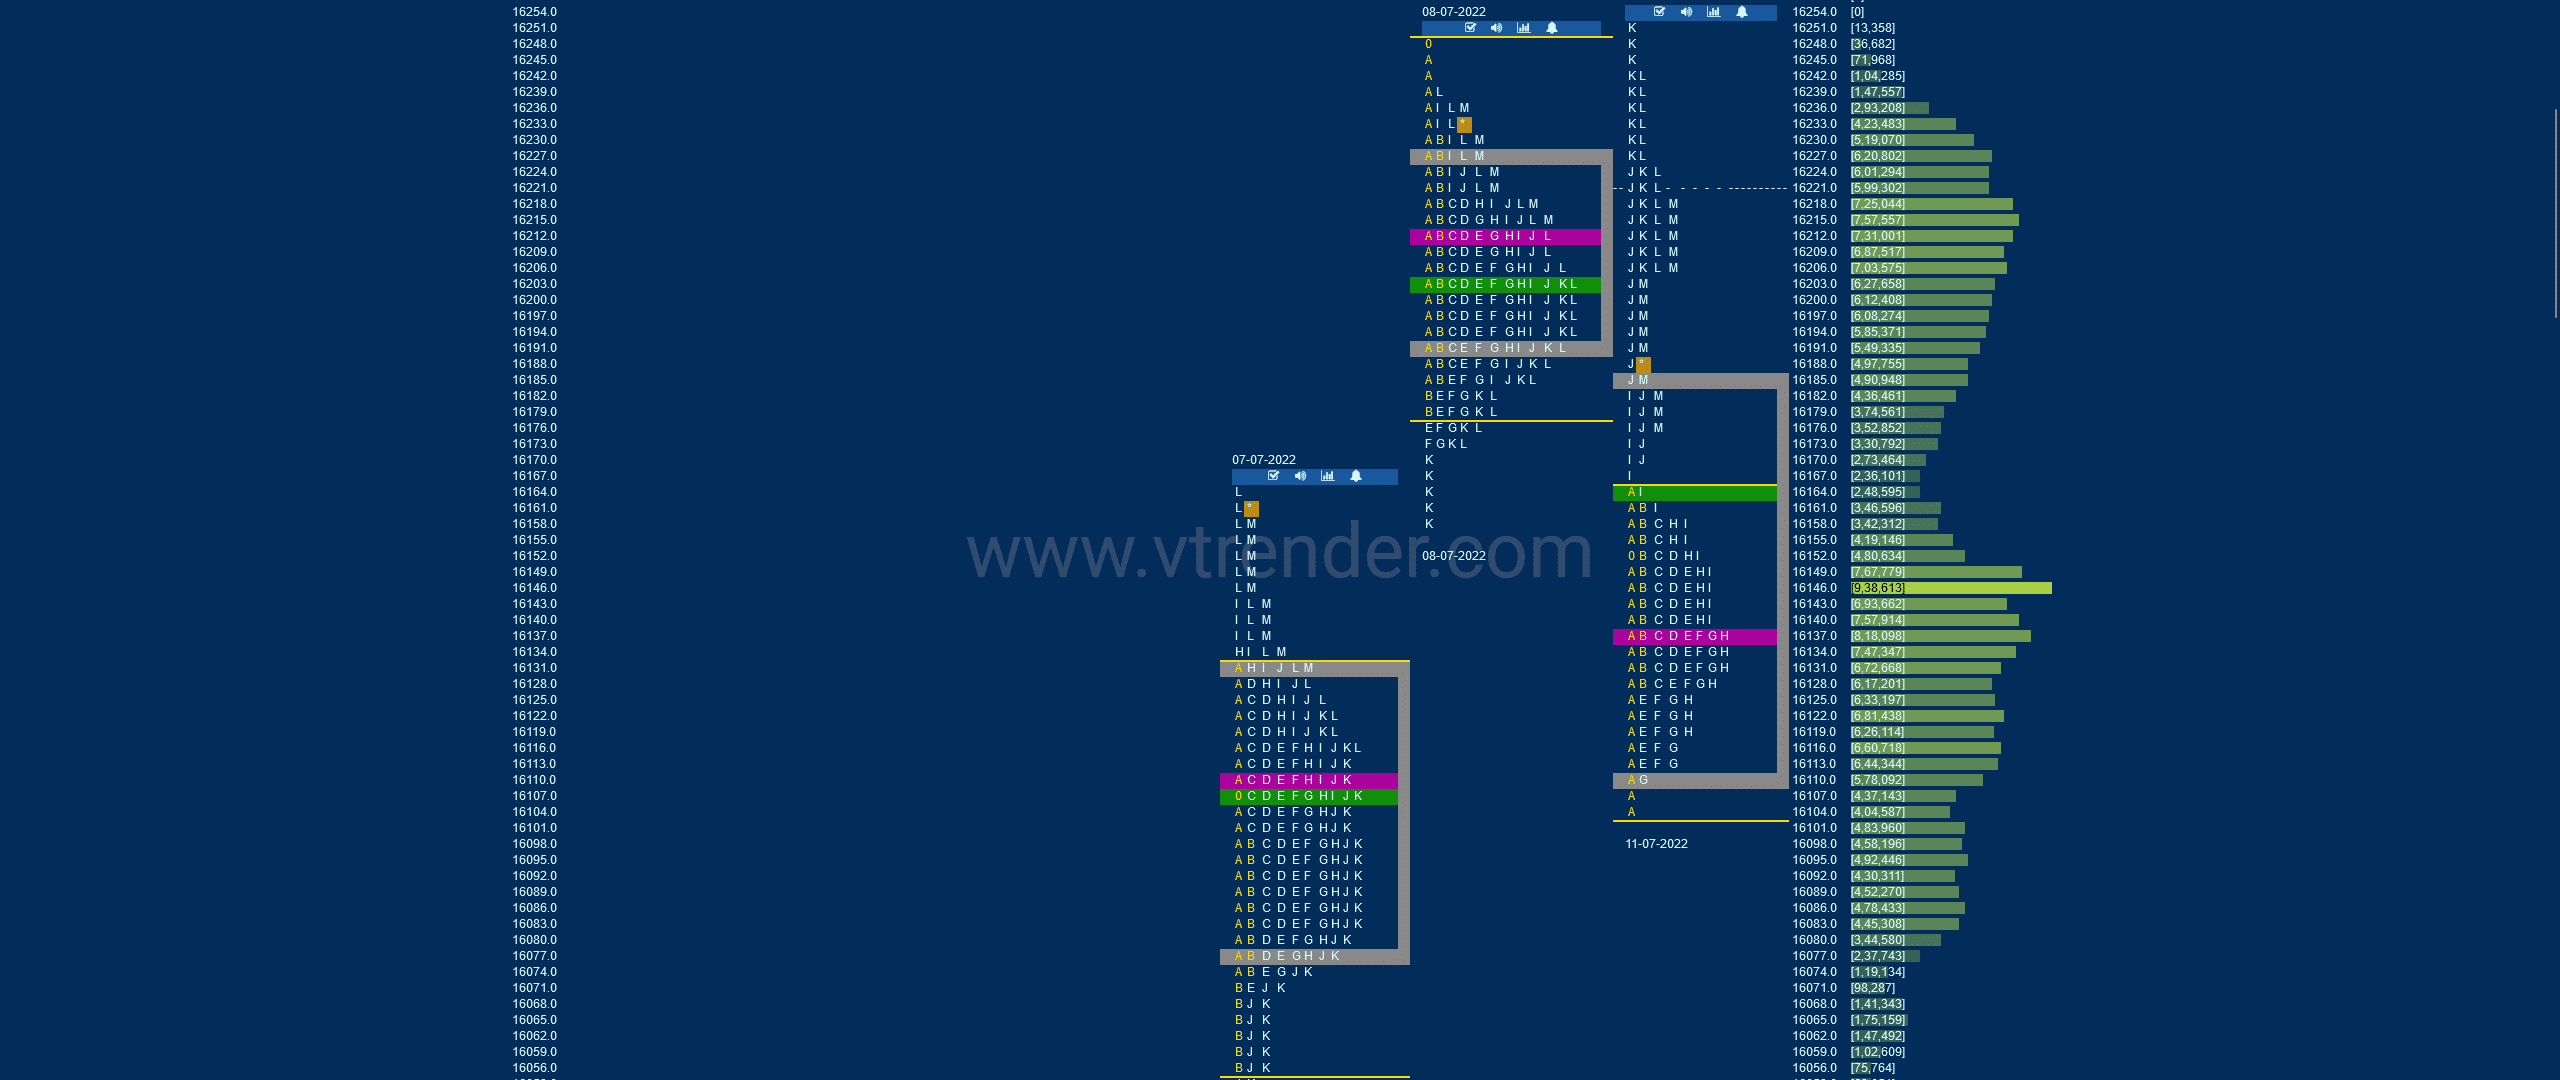 Nf 7 Market Profile Analysis Dated 11Th Jul 2022 Banknifty Futures, Charts, Day Trading, Intraday Trading, Intraday Trading Strategies, Market Profile, Market Profile Trading Strategies, Nifty Futures, Order Flow Analysis, Support And Resistance, Technical Analysis, Trading Strategies, Volume Profile Trading